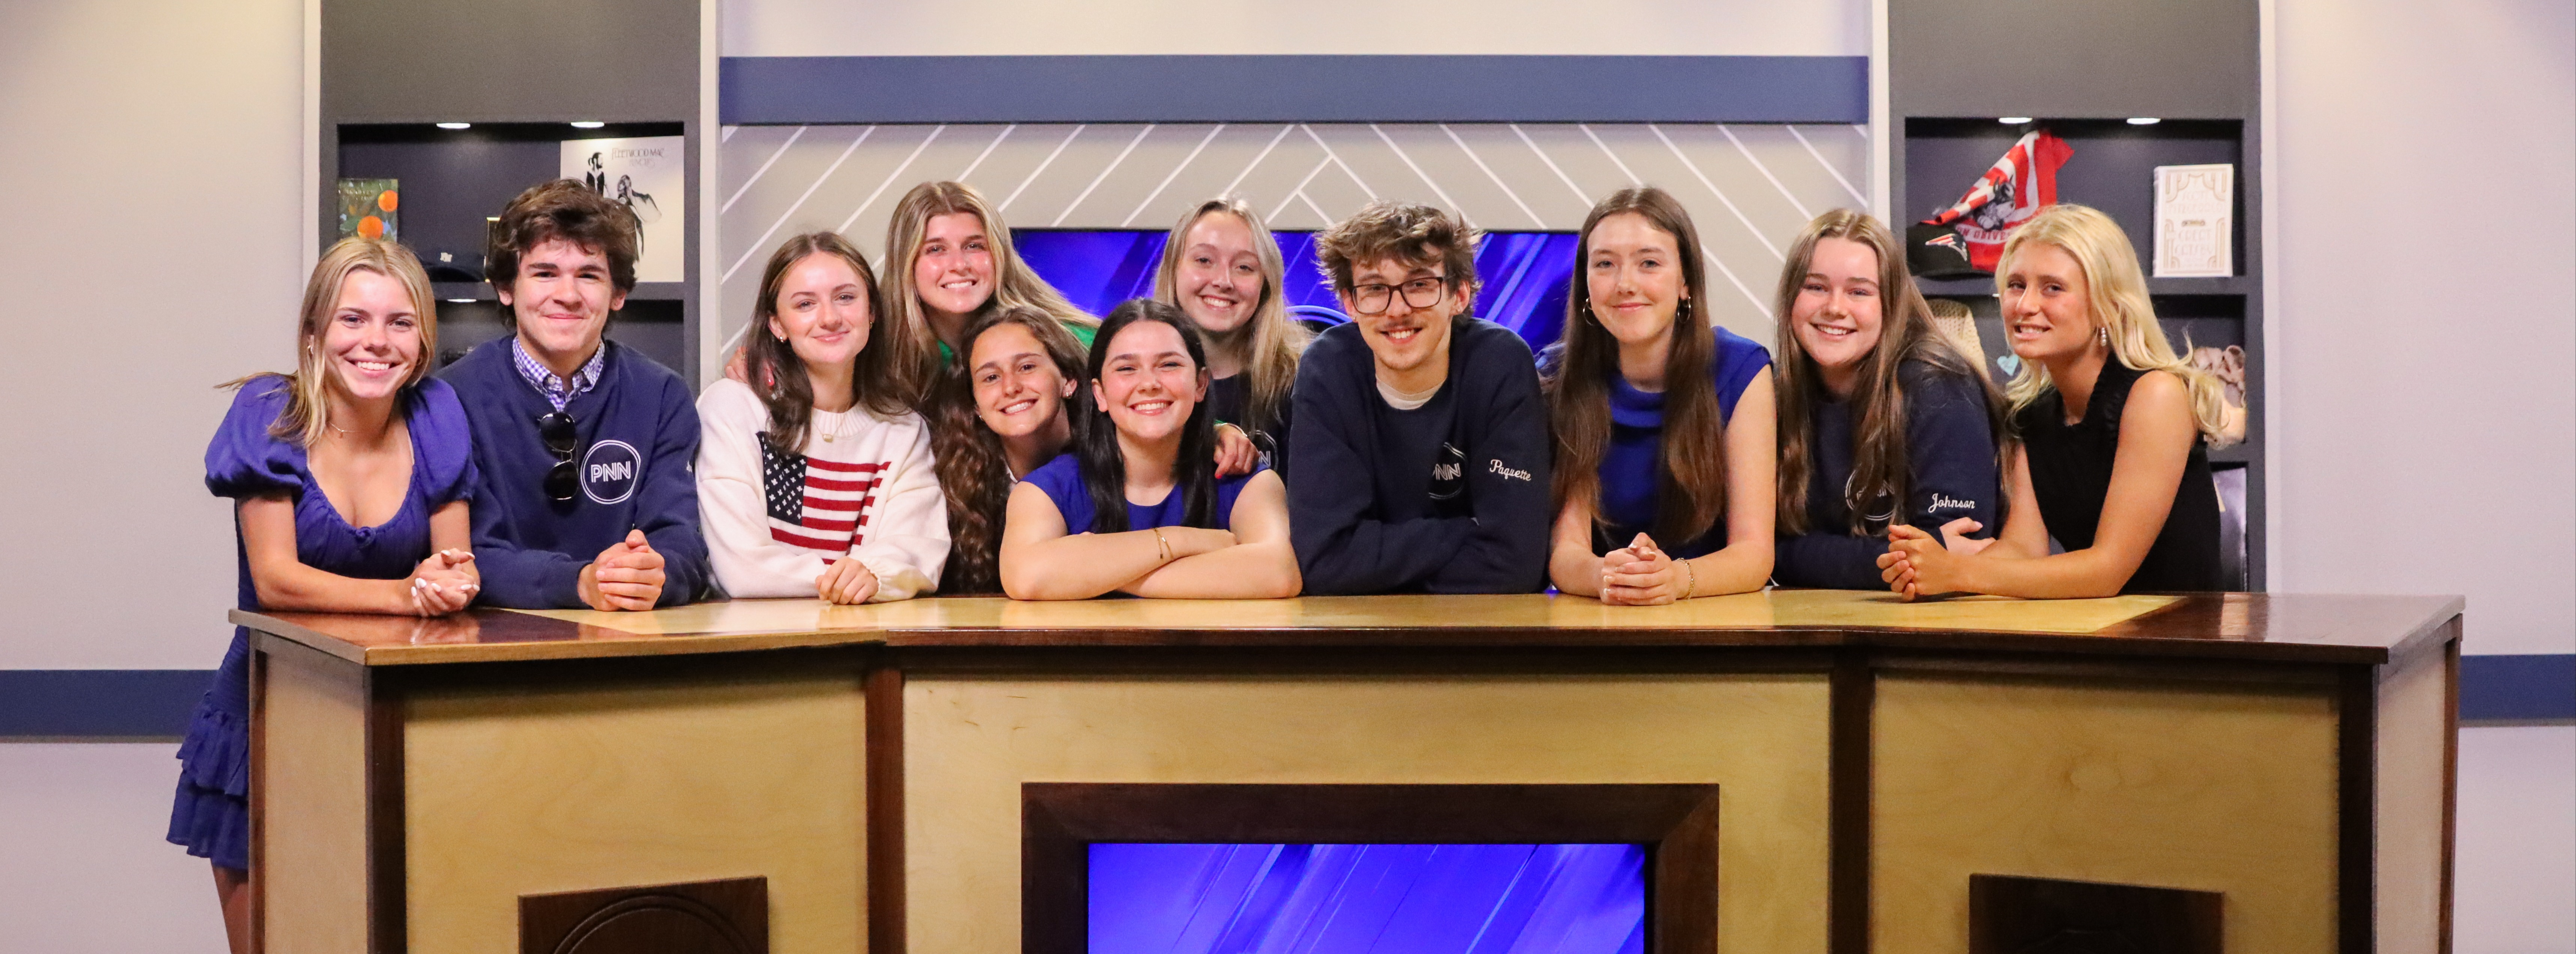 Plymouth North News students around the News Desk